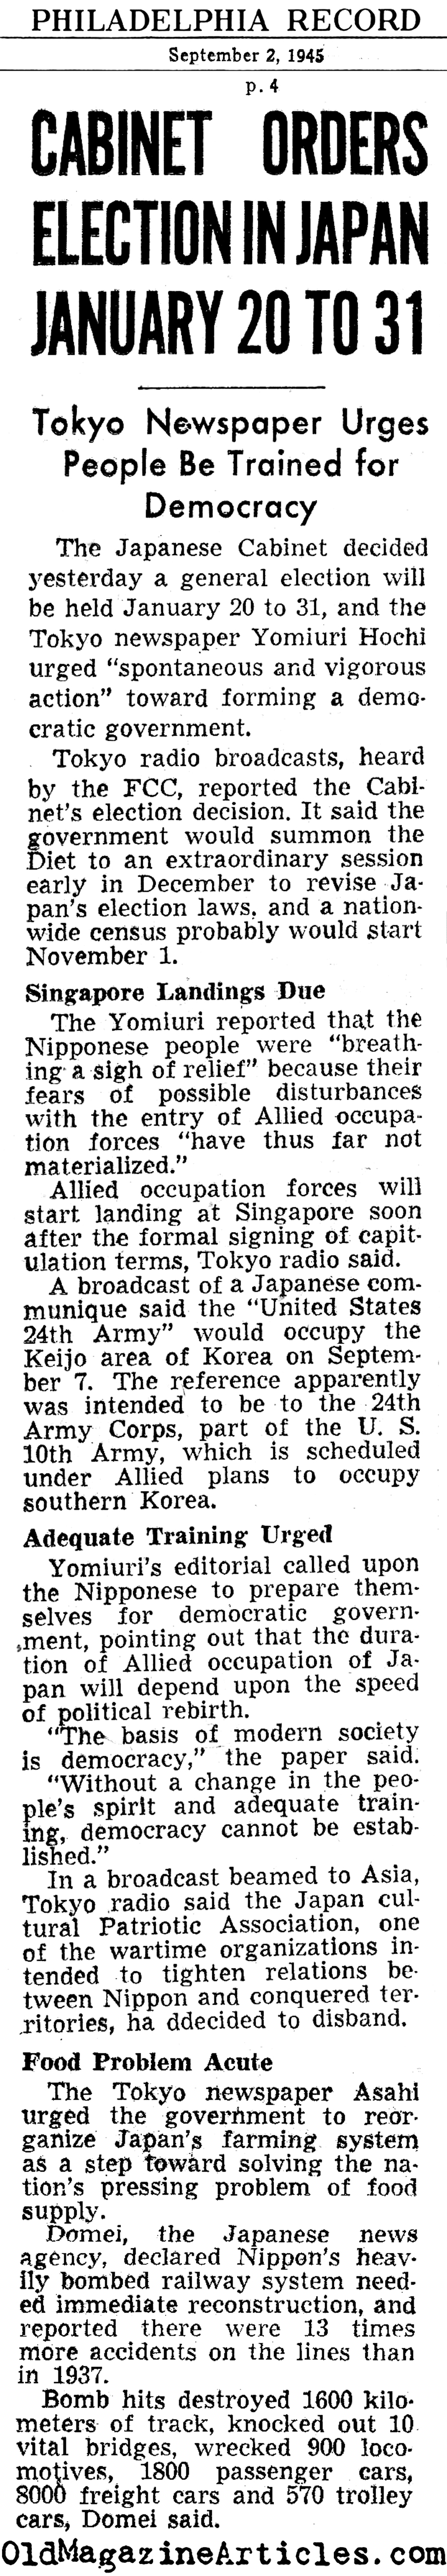 First Election Planned for Post-Fascist Japan (Philadelphia Record, 1945)